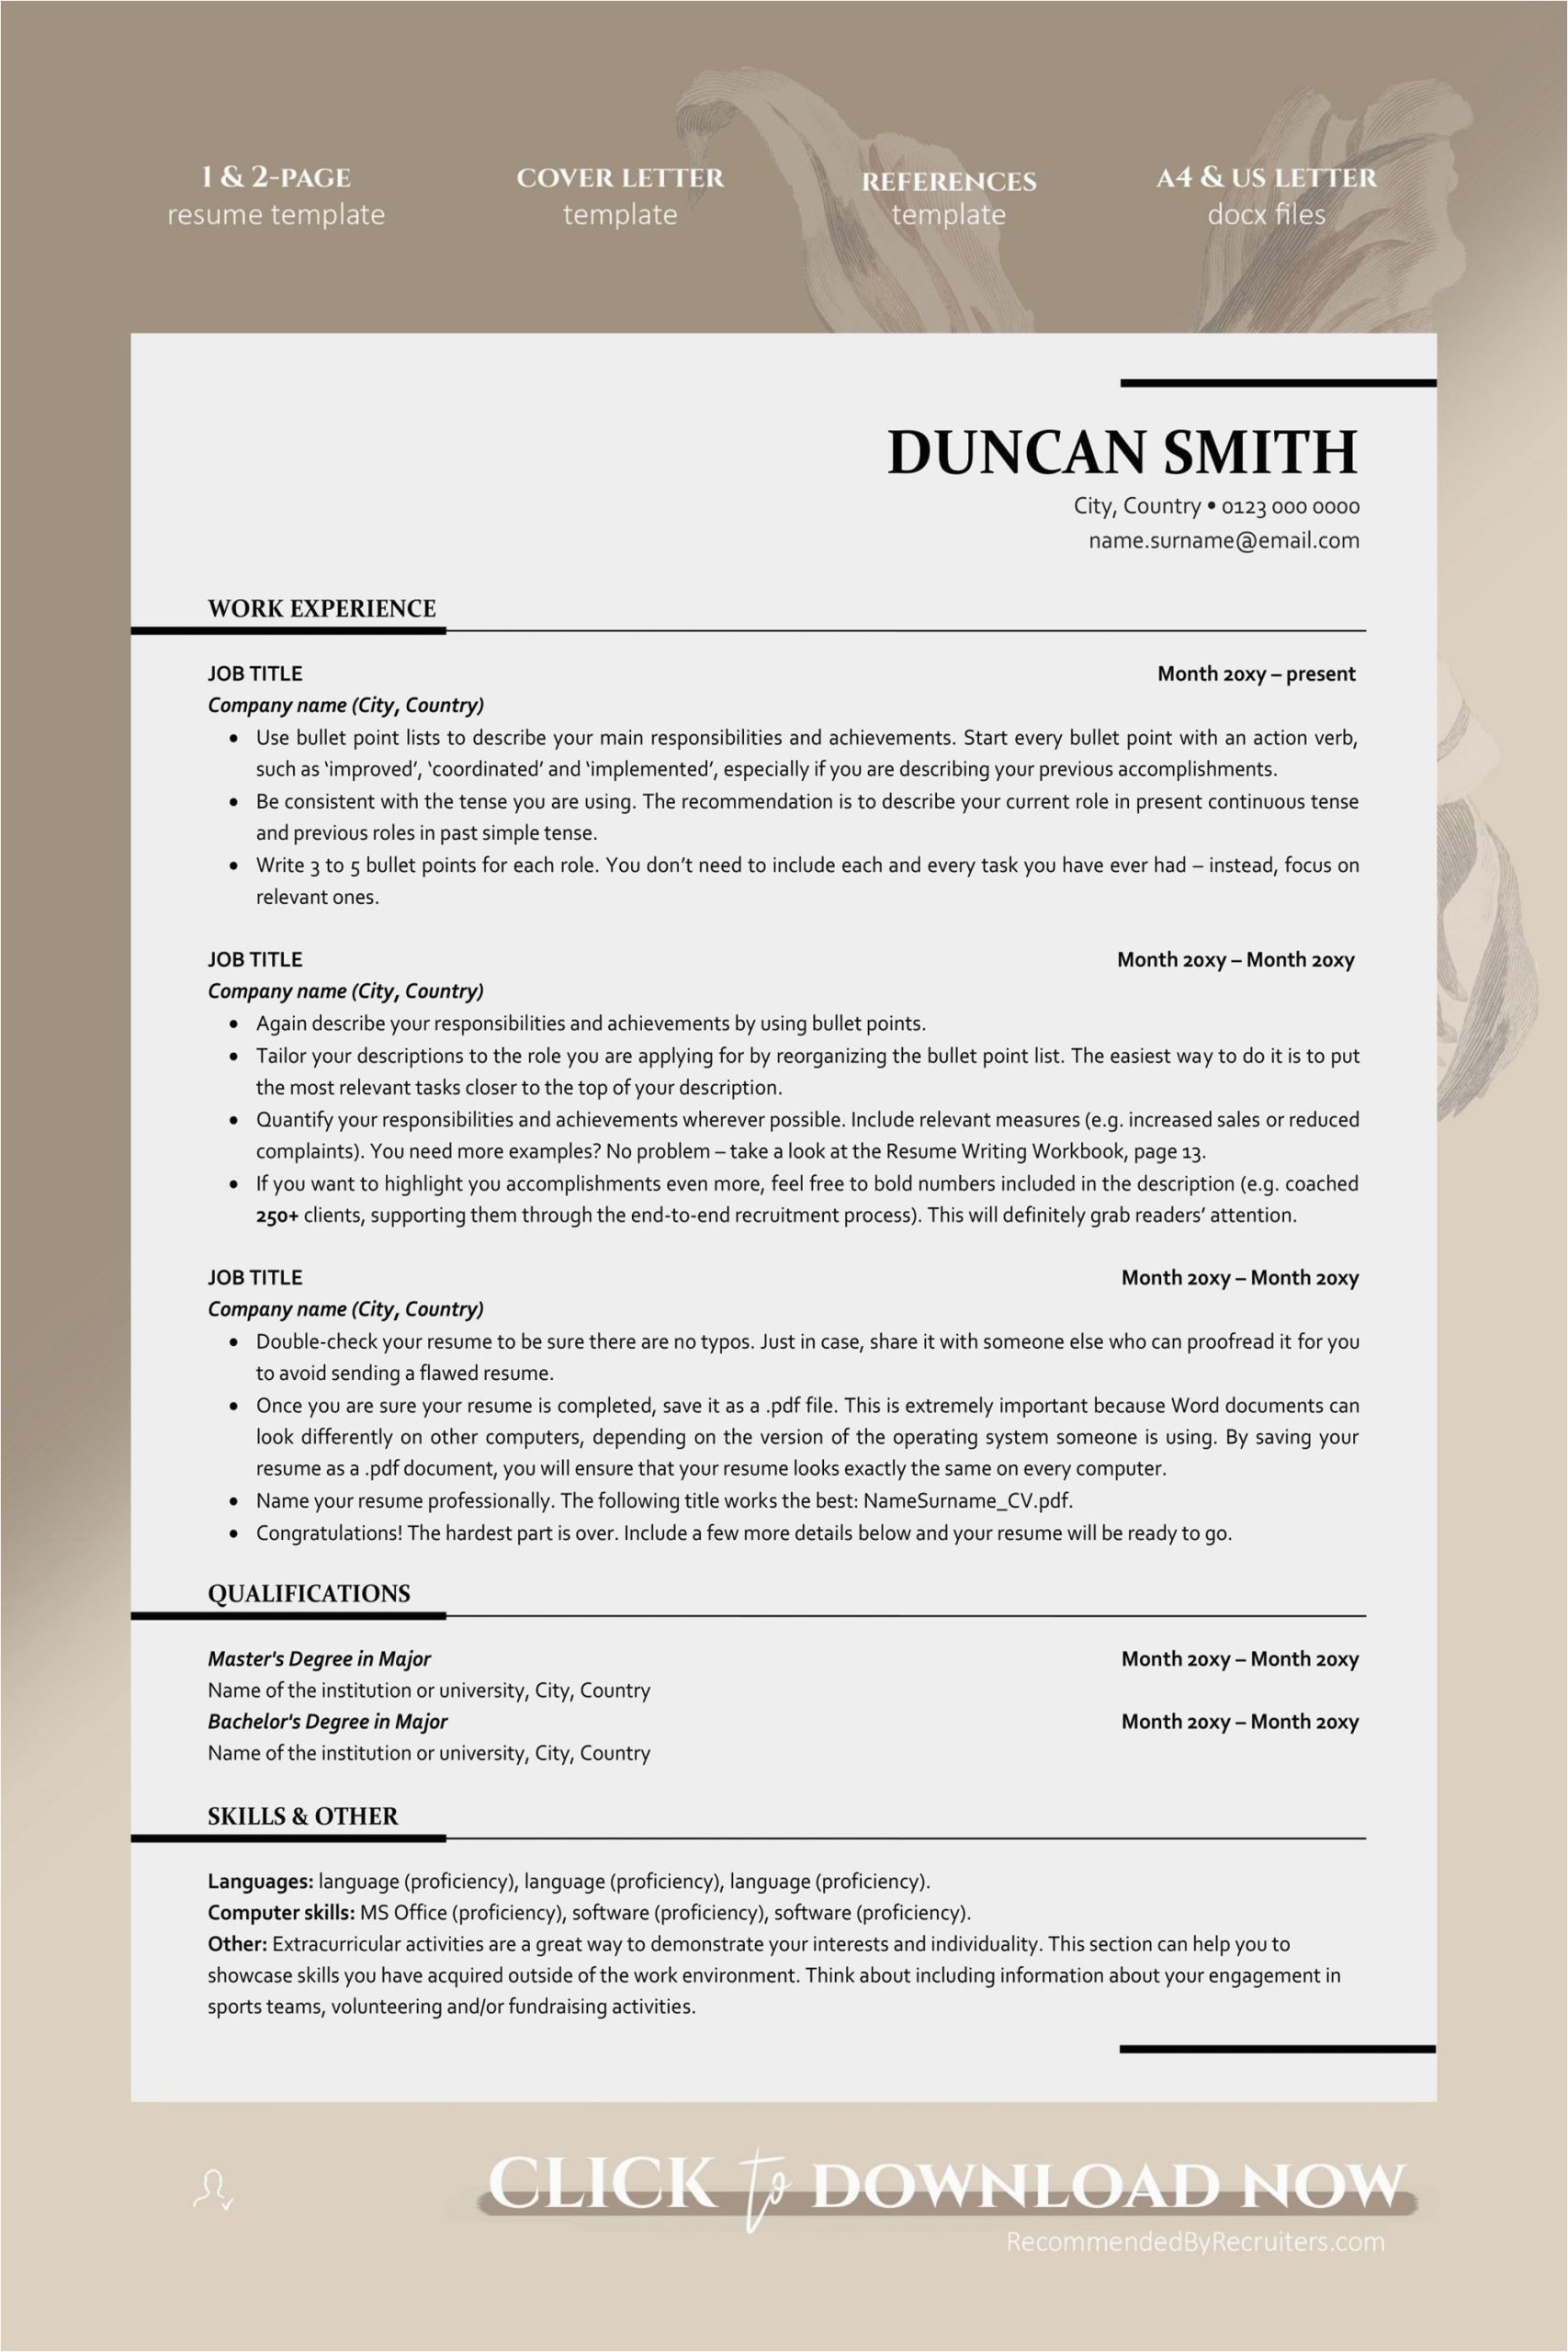 Sample Resume to Get Past ats How to Make ats Pliant Resume Restume